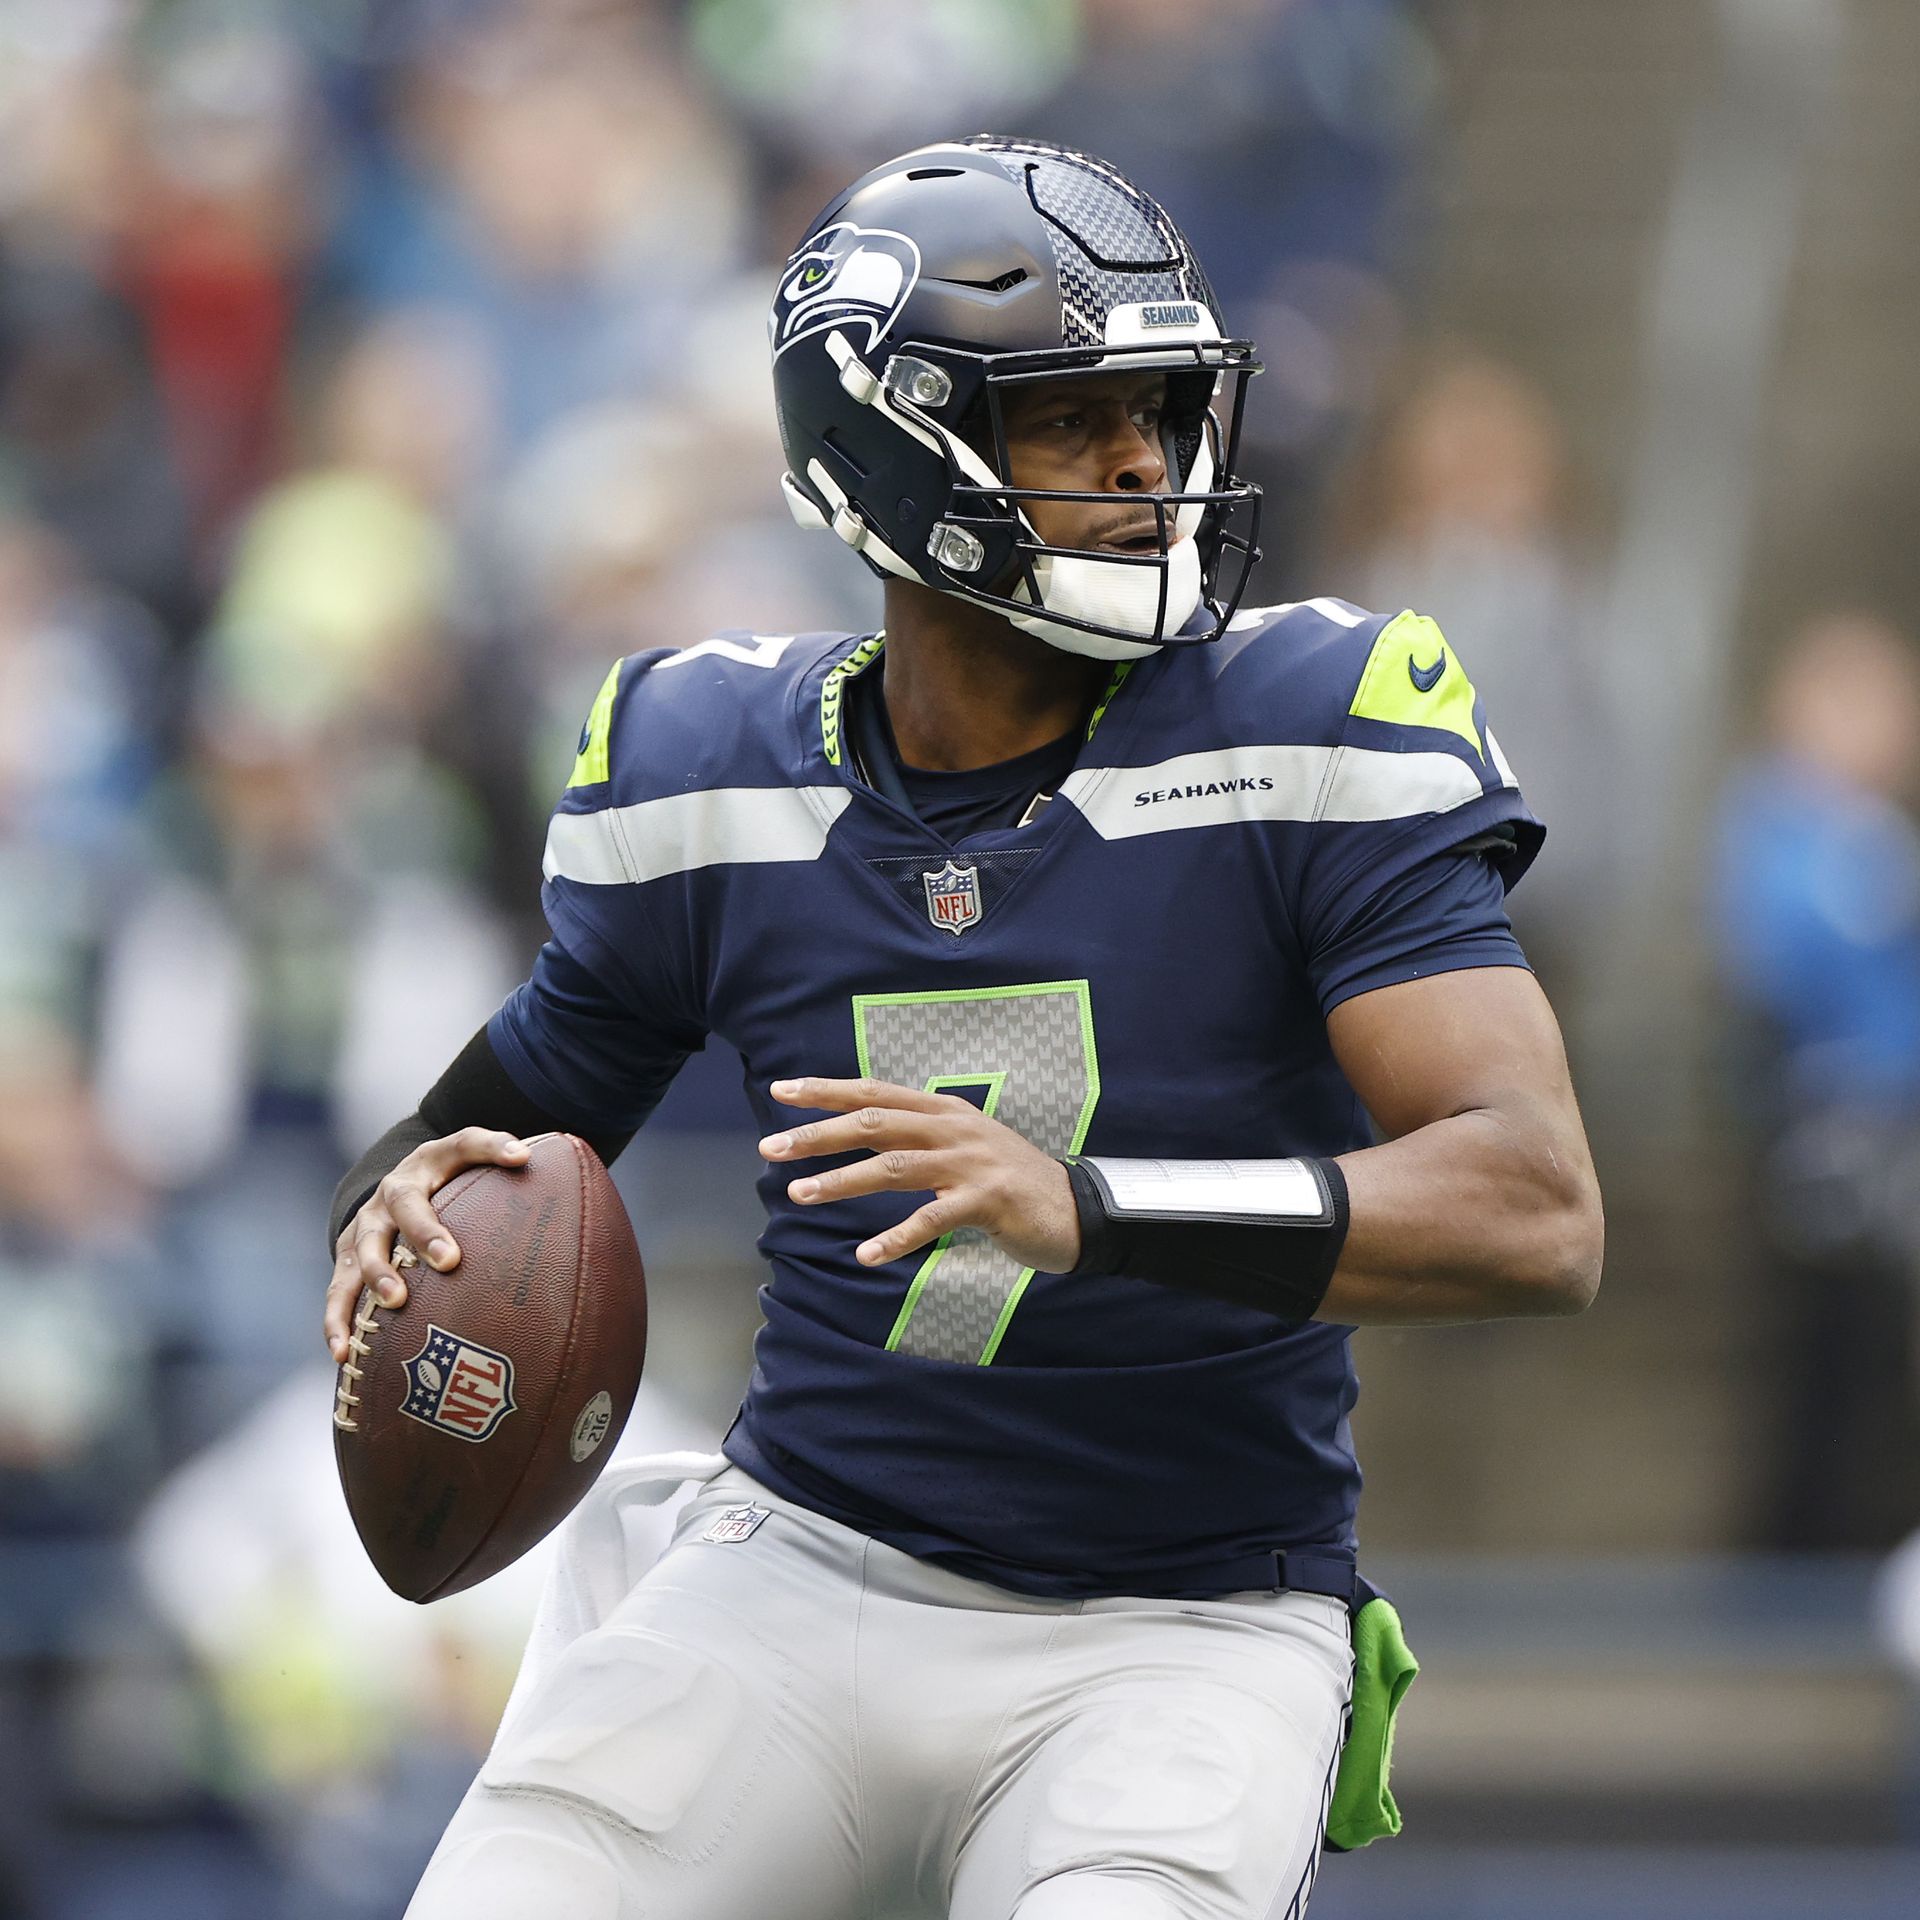 Seattle Seahawks' season looks promising with Geno Smith at the